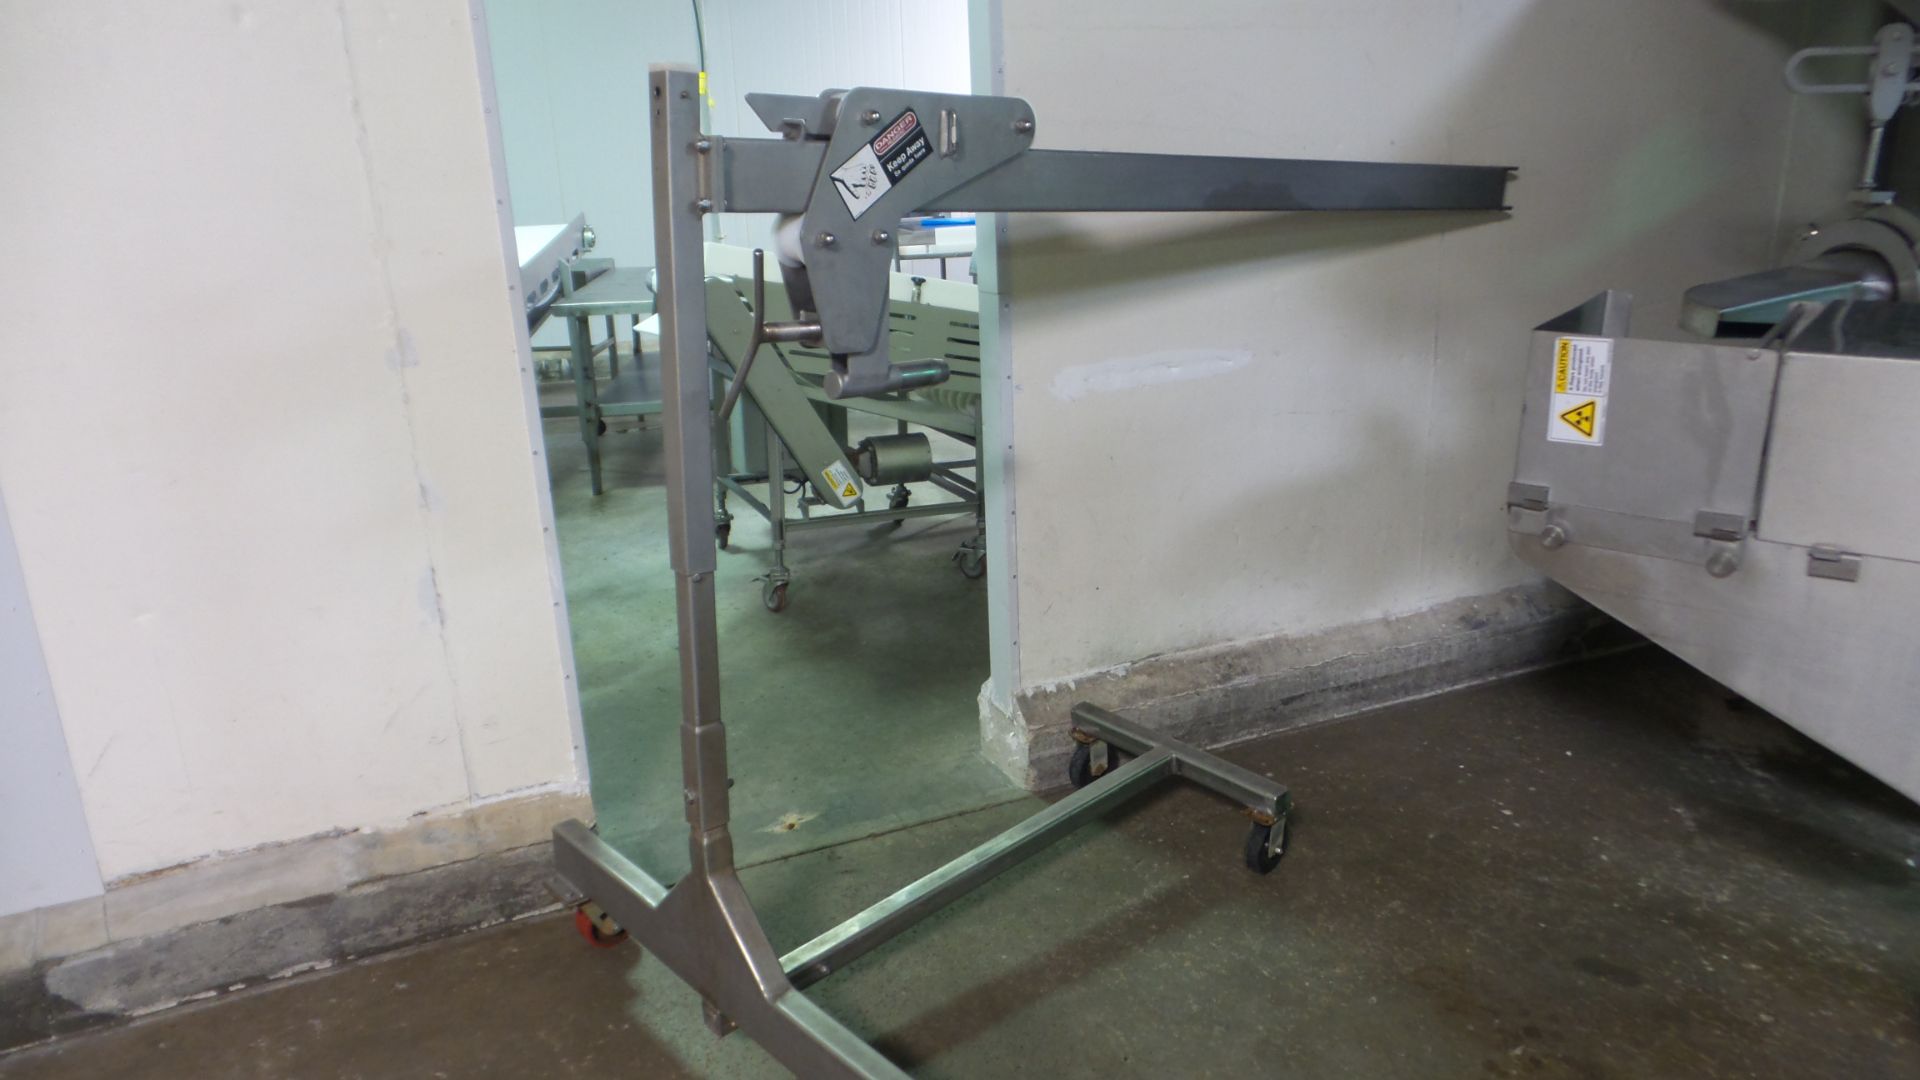 Stainless Steel Auger Puller, 7' long, on wheels;*** All Funds Must Be Received By Friday, January